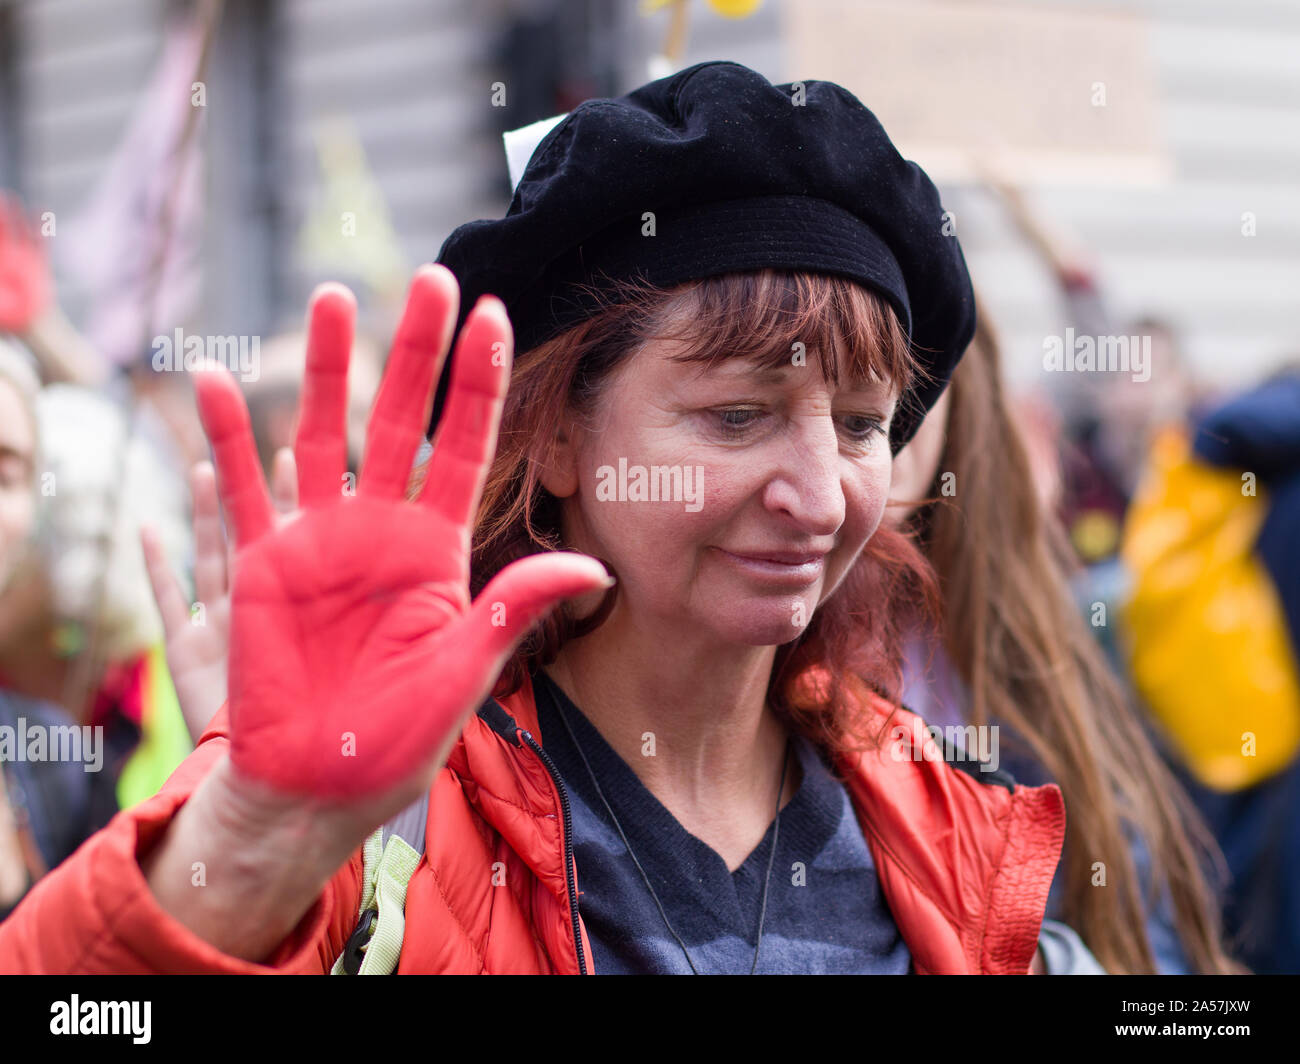 Whitehall, London, UK. 18 October 2019. Environmental campaigners Extinction Rebellion, including Red Rebellion, families and young children protest along Whitehall to reach outside the gates of Downing Street. Activists sing and hold their hands which are painted red to symbolise blood. Protesters demand decisive action from the UK Government on the global environmental crisis. Stock Photo